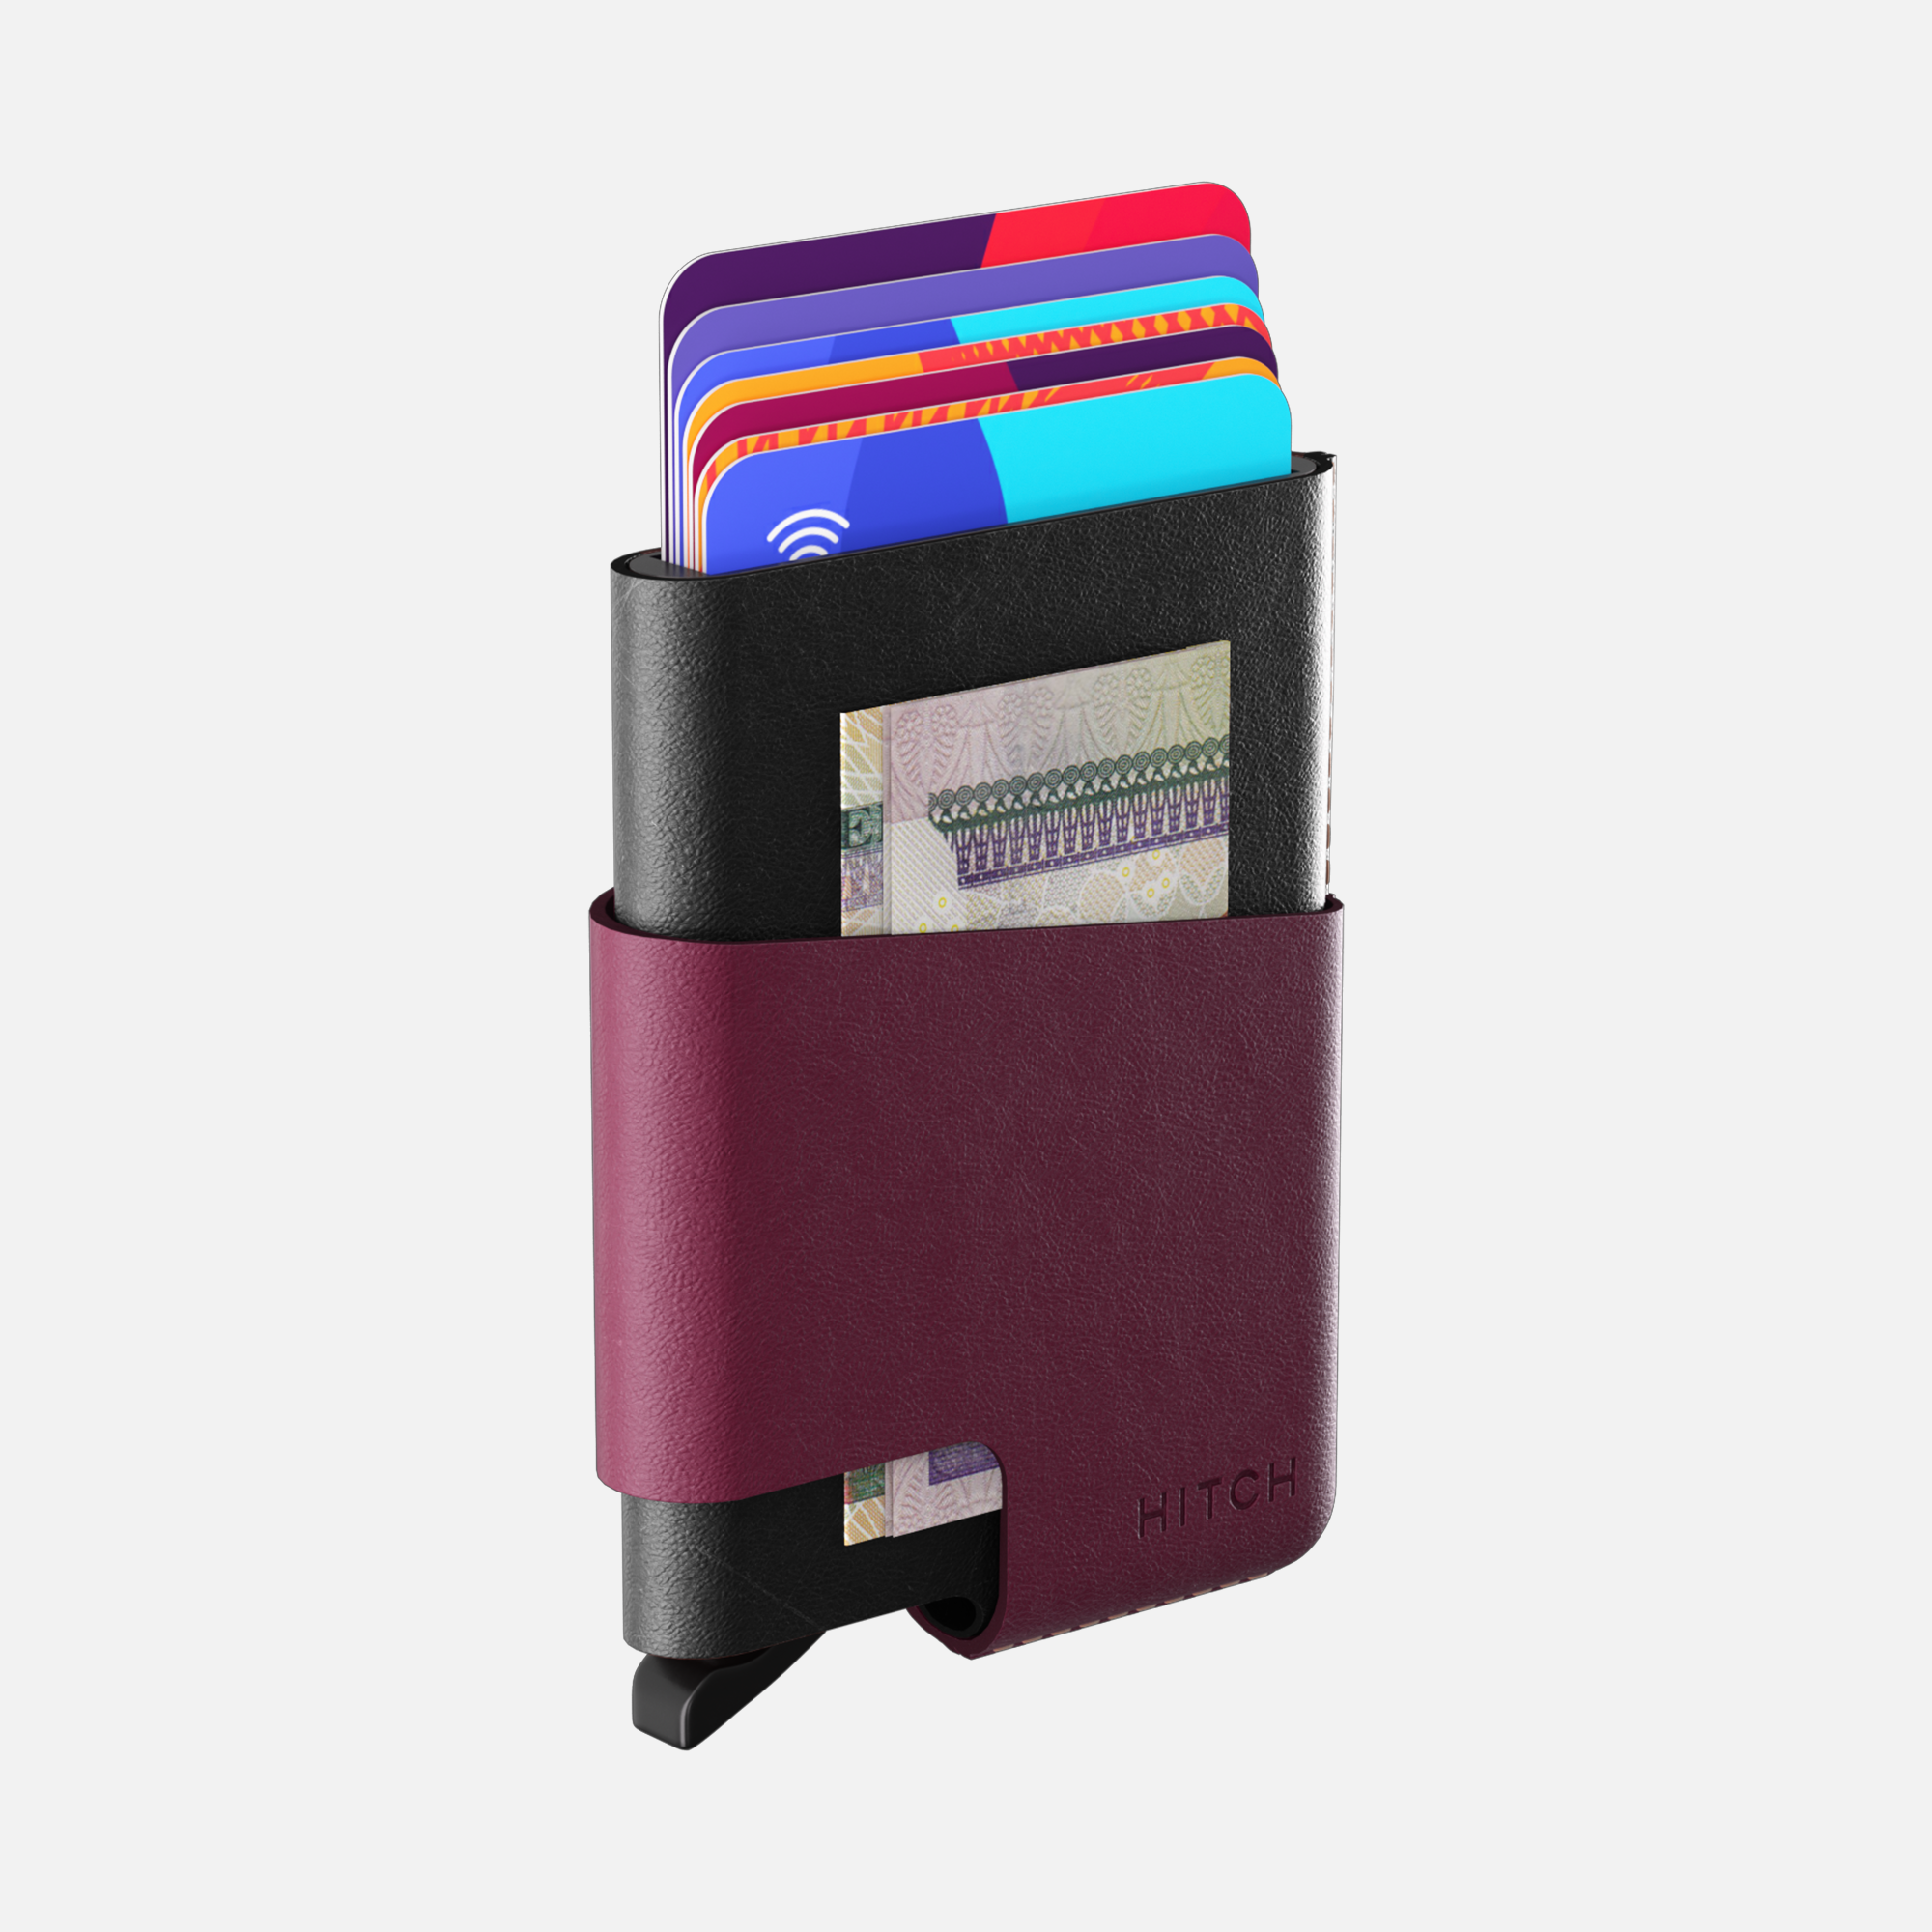 Compact black and maroon leather wallet with colorful credit cards and cash on white background.